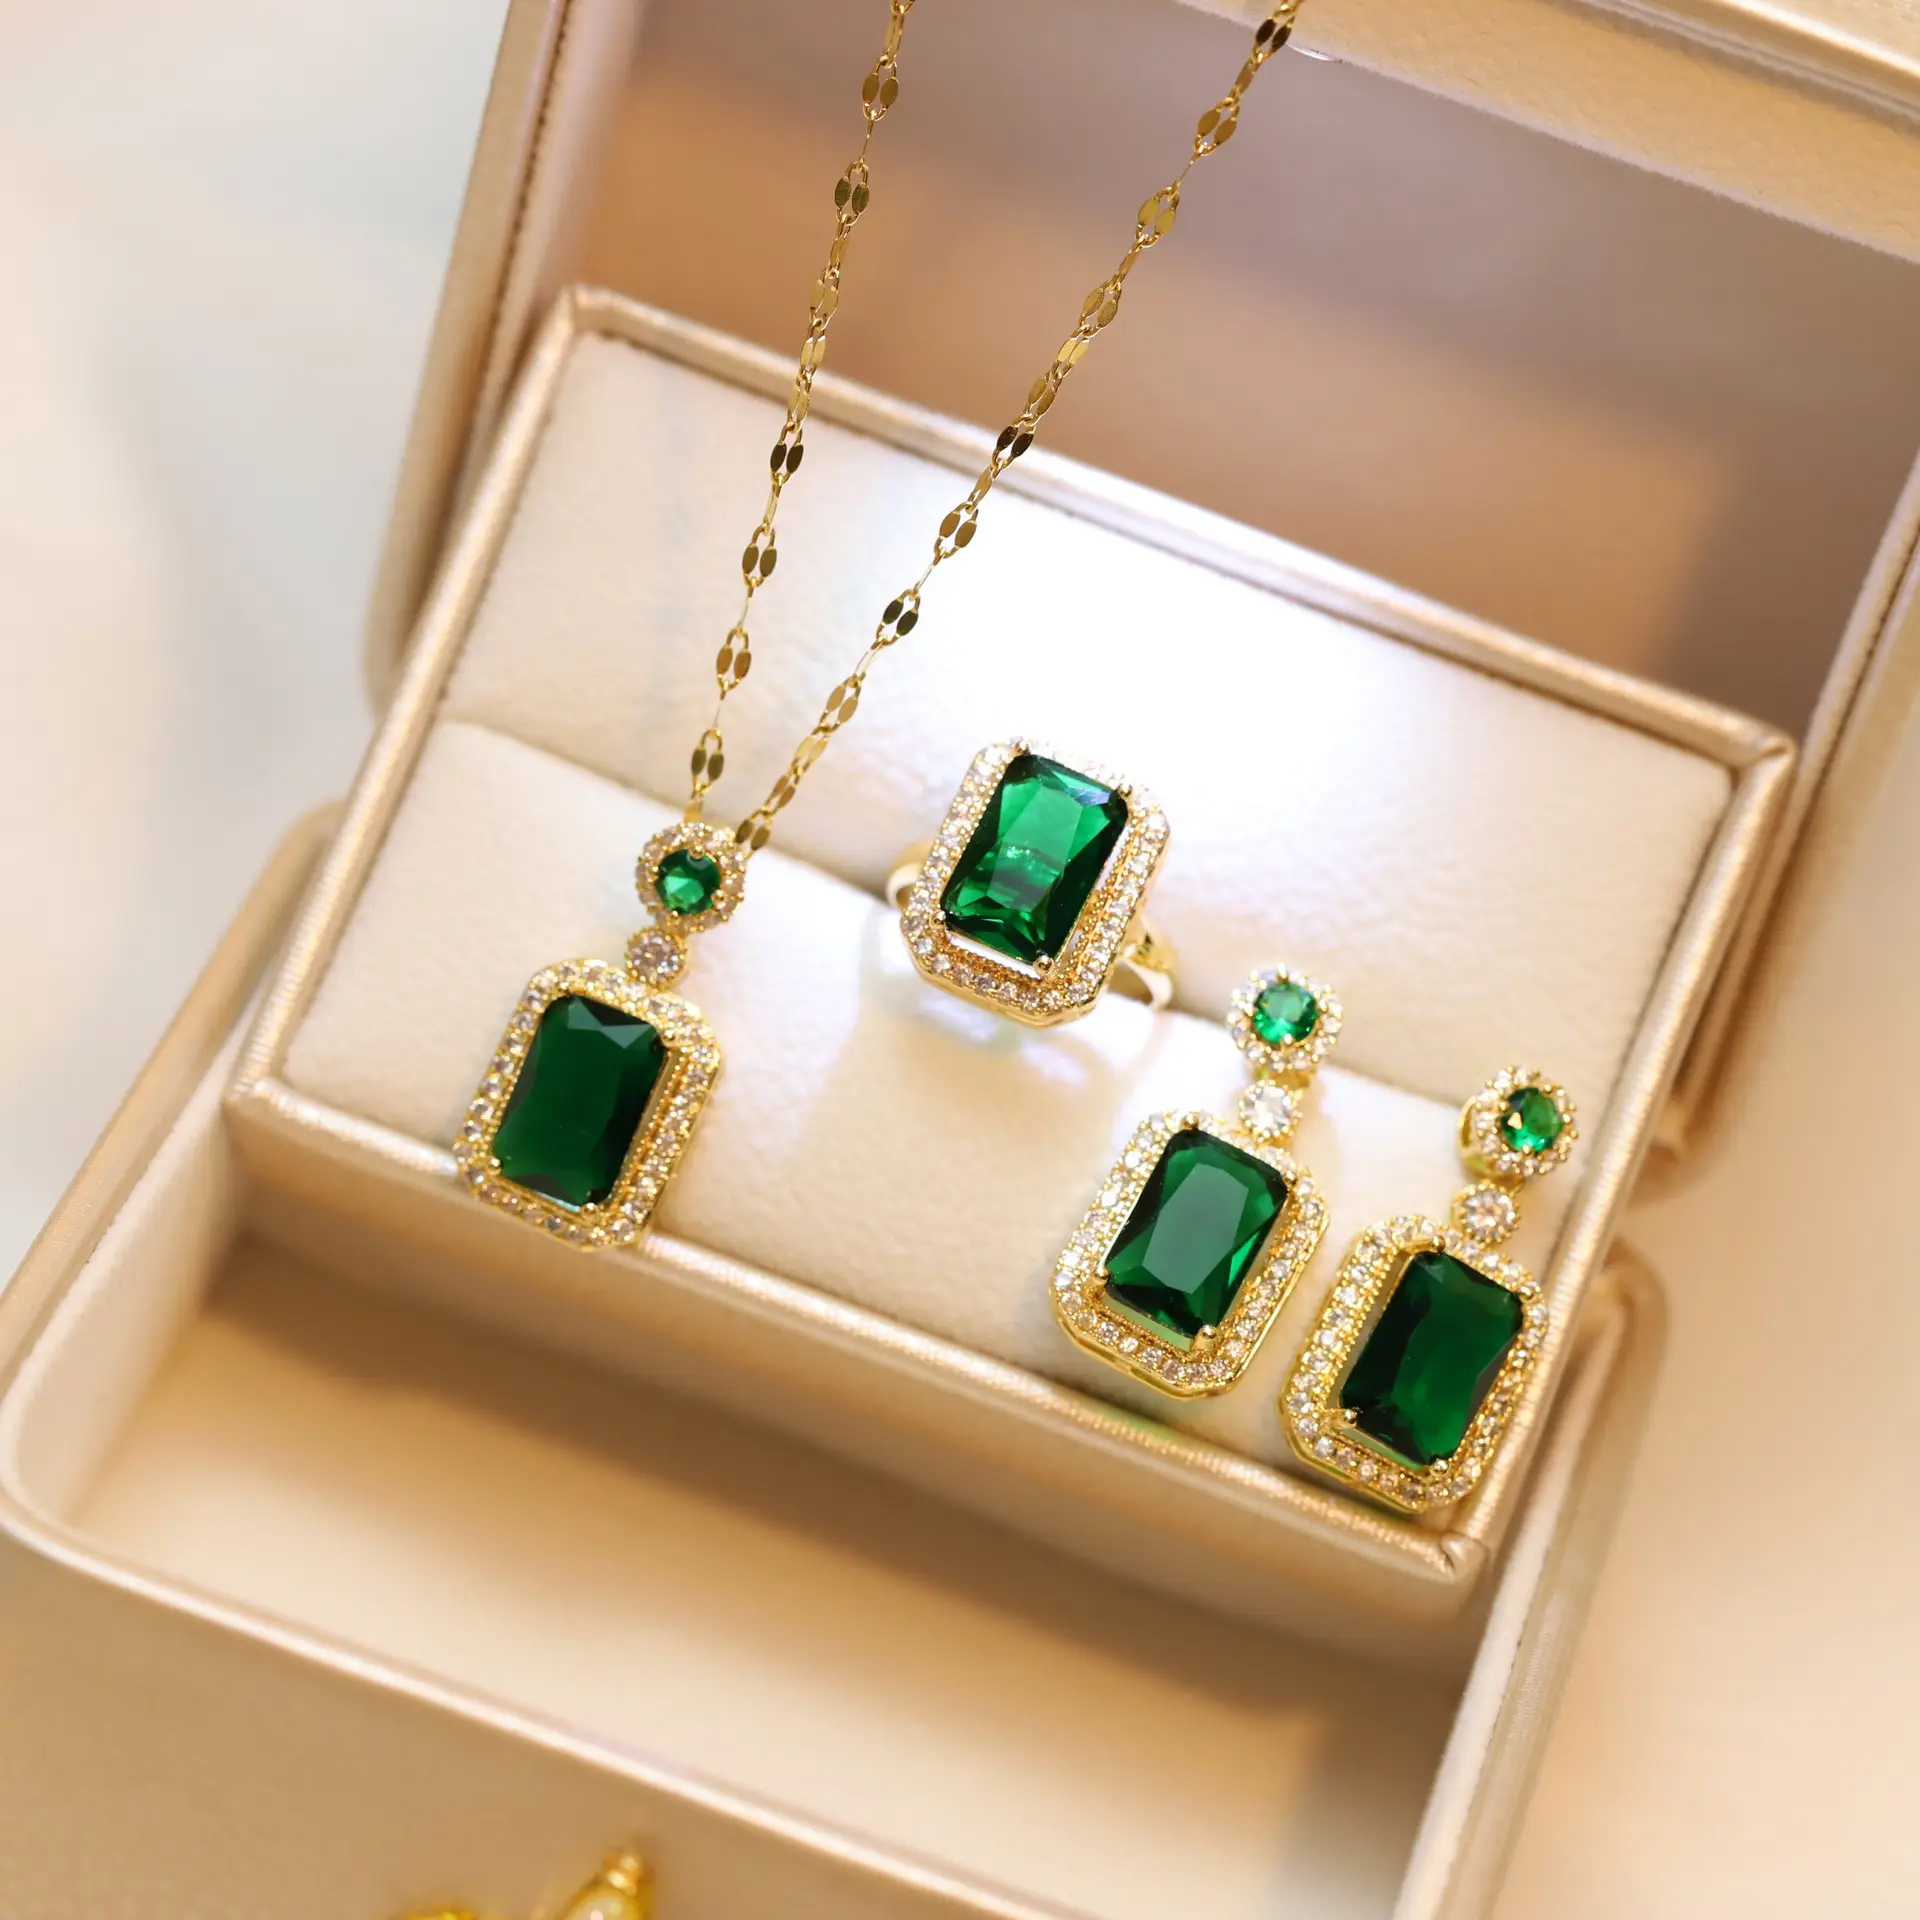 18k Gold Plated Stainless Steel Necklace Earrings Ring Set Rectangle Emerald Cut Green Gemstone Diamond Zirconia Jewelry Set